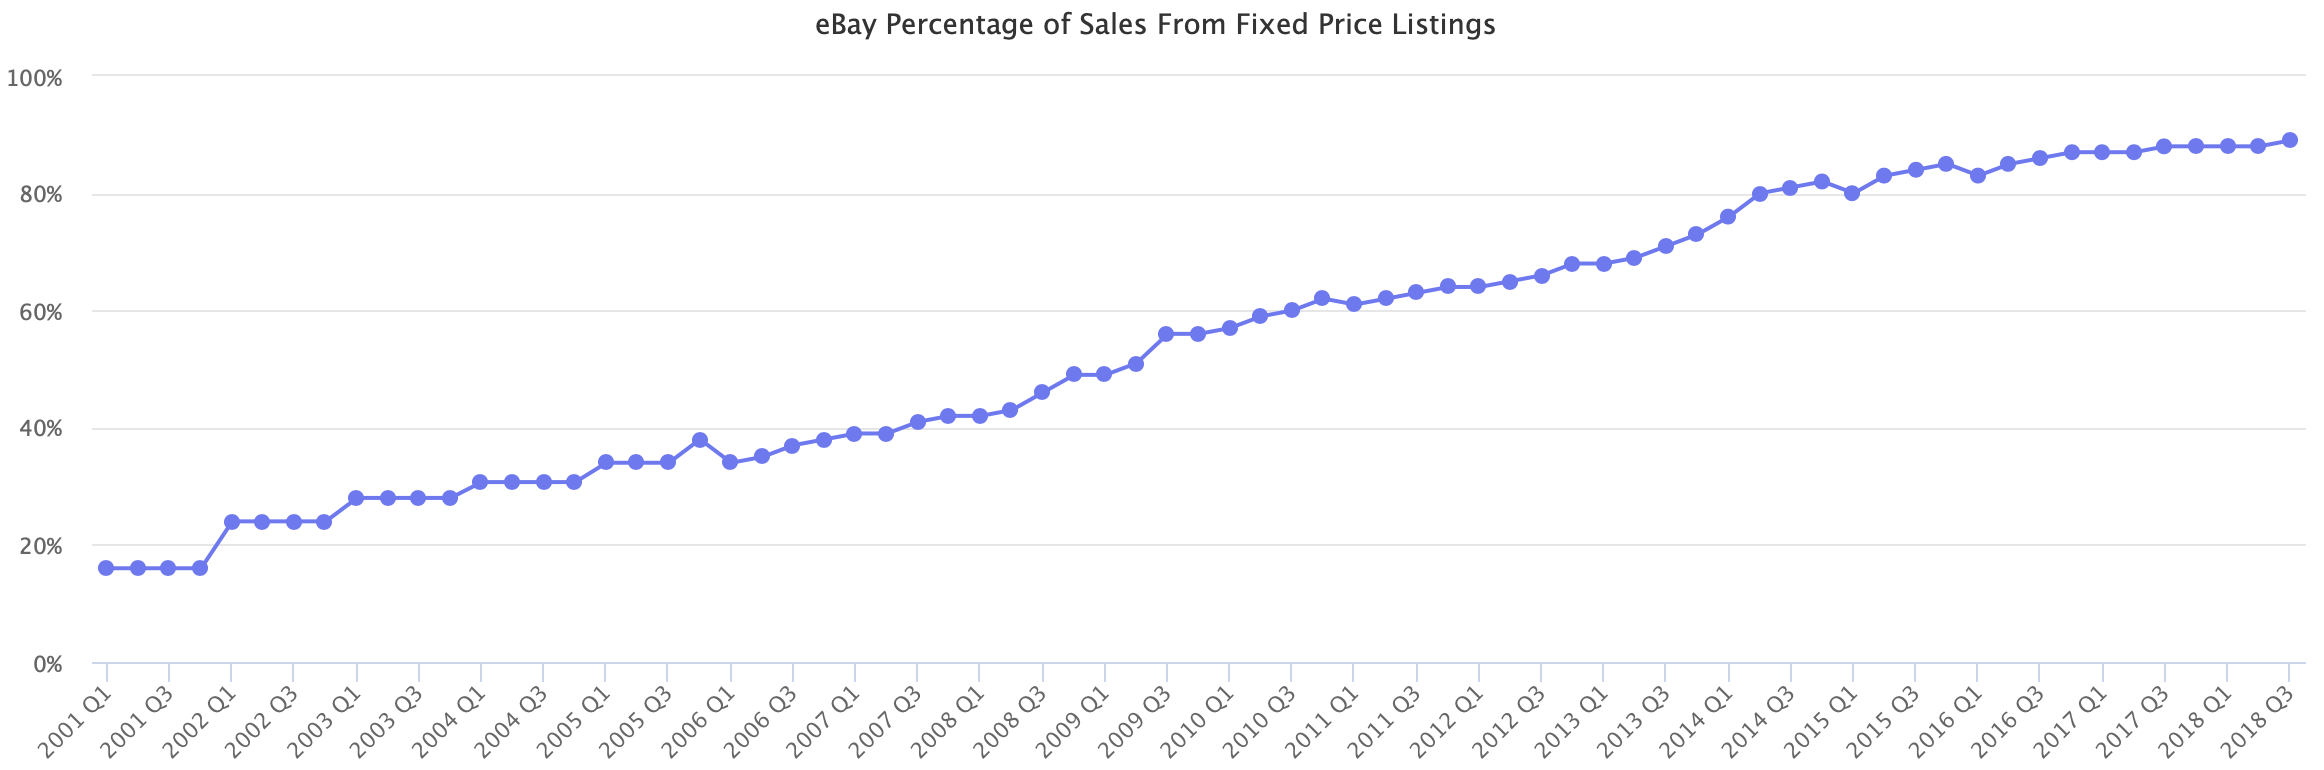 eBay Percentage of Sales From Fixed Price Listings